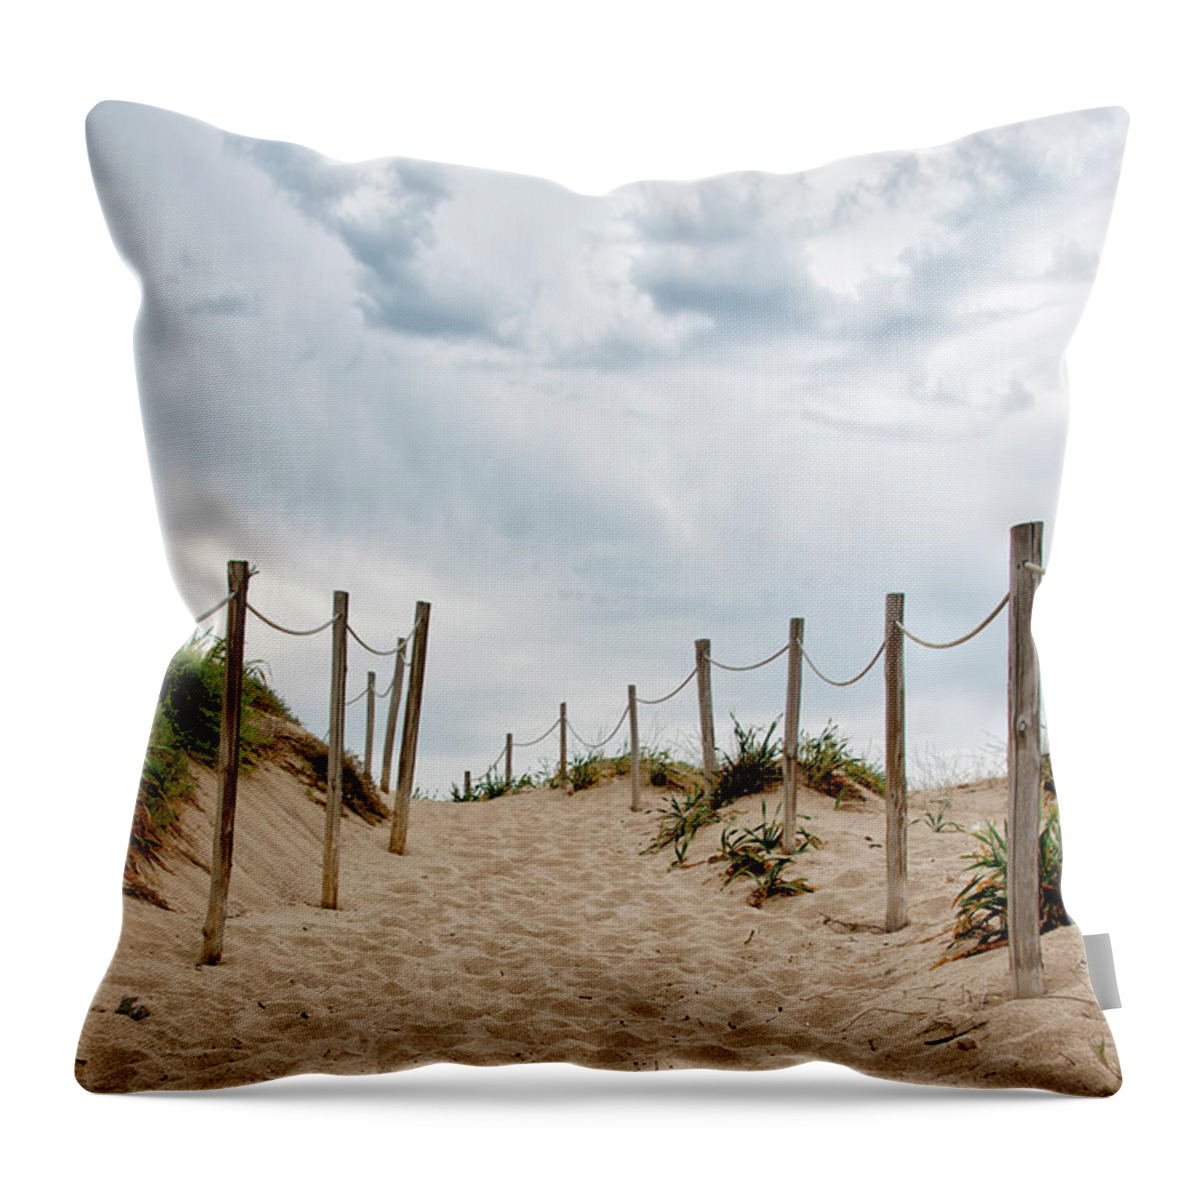 Grass Throw Pillow featuring the photograph To The Beach | Sardinia, Italy by Stefan Cioata